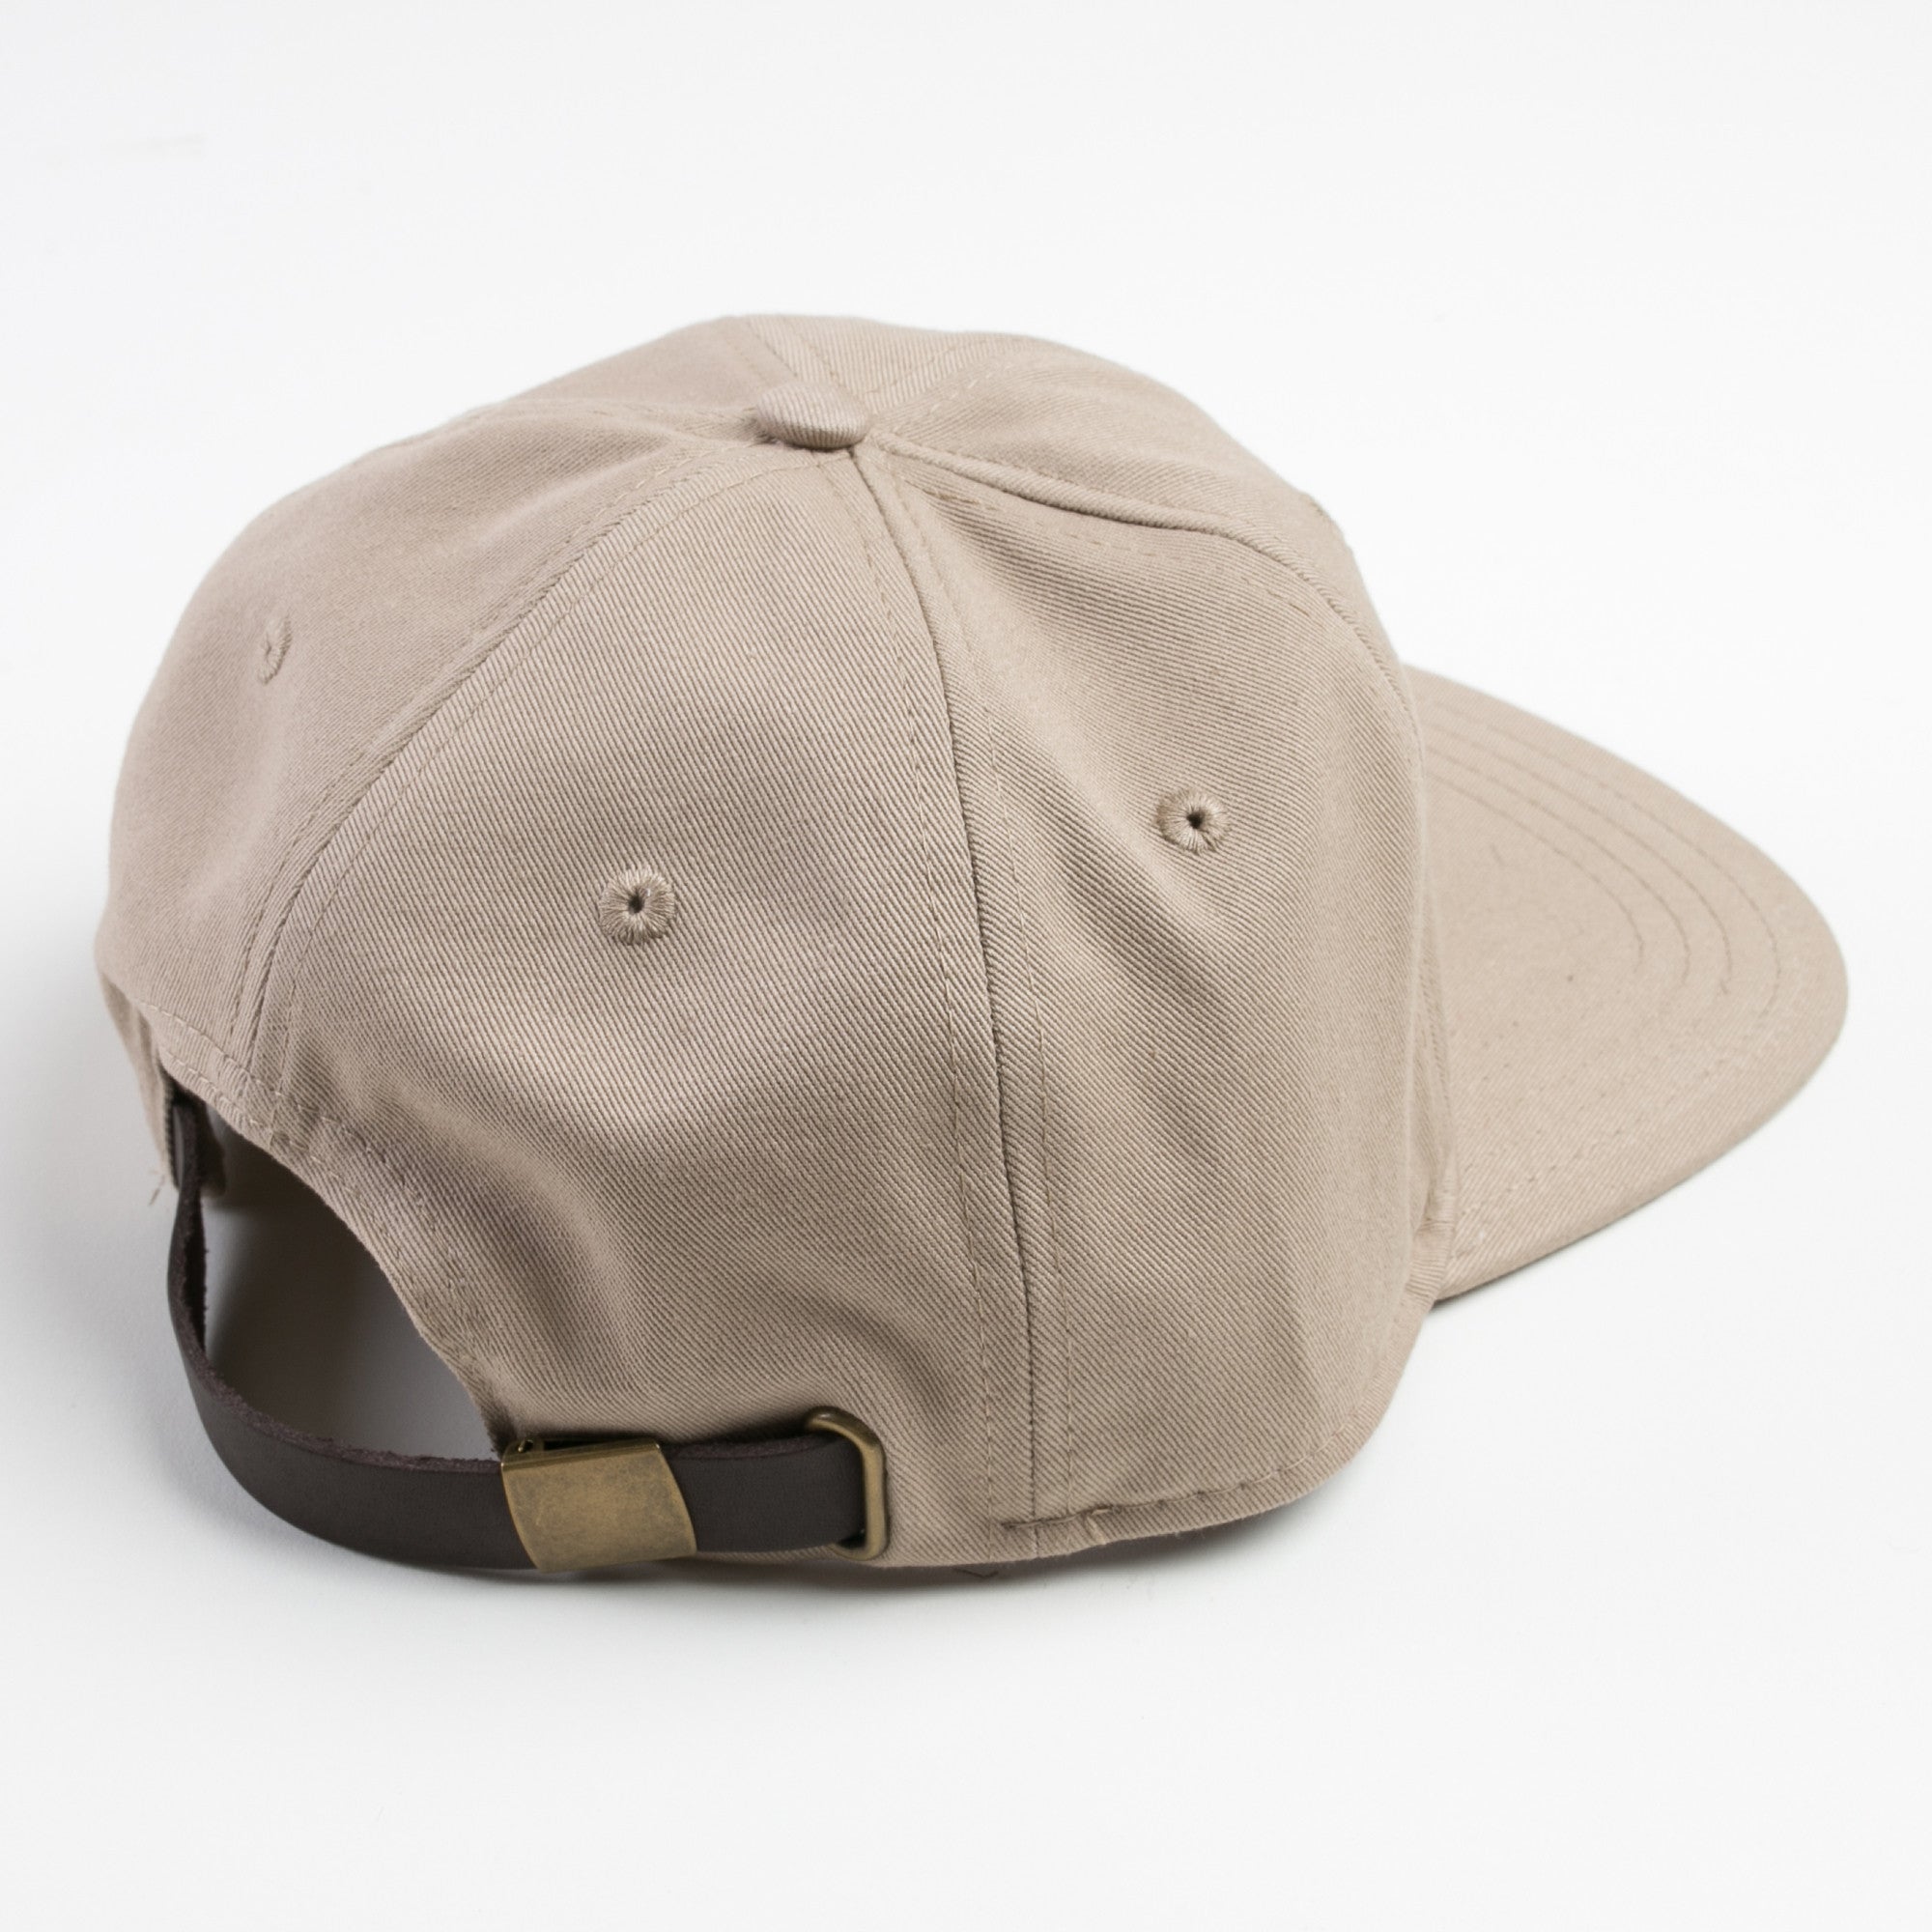 Shoots - No Problems Cap in Khaki and Brown